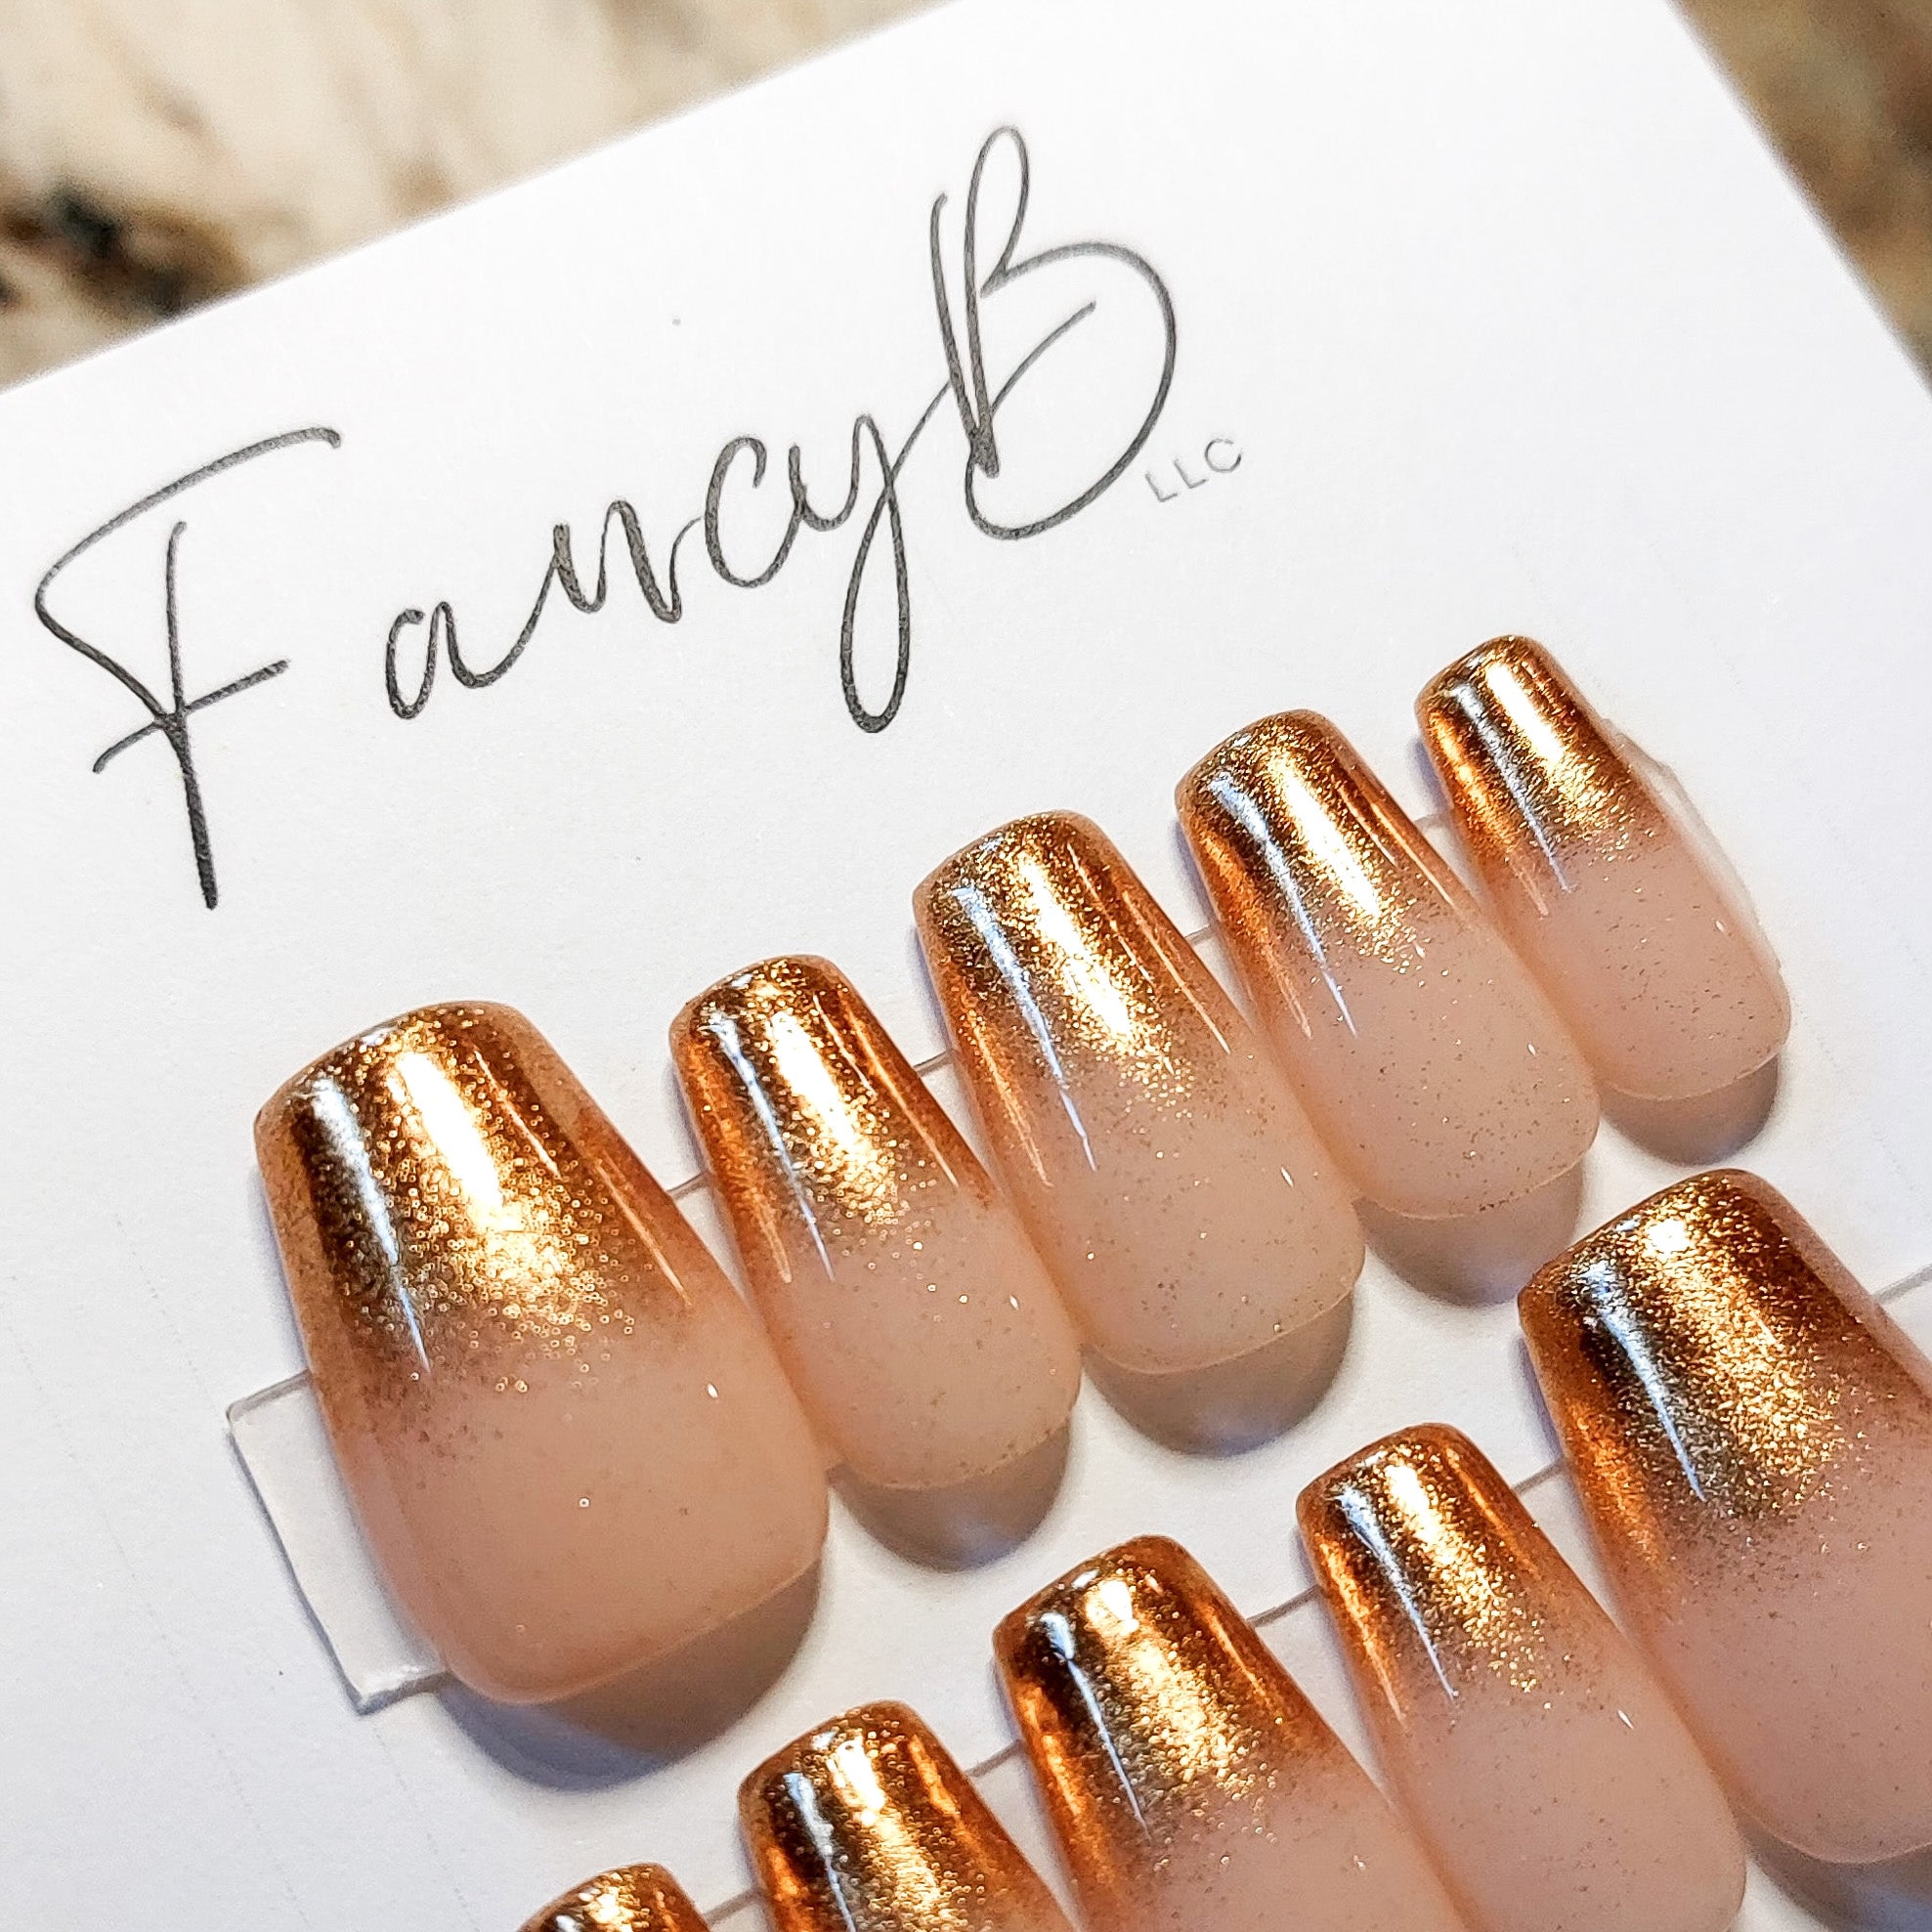 Custom press on nails with gold chrome ombre tips, nude base color and short coffin shape. Fancyb Nails.